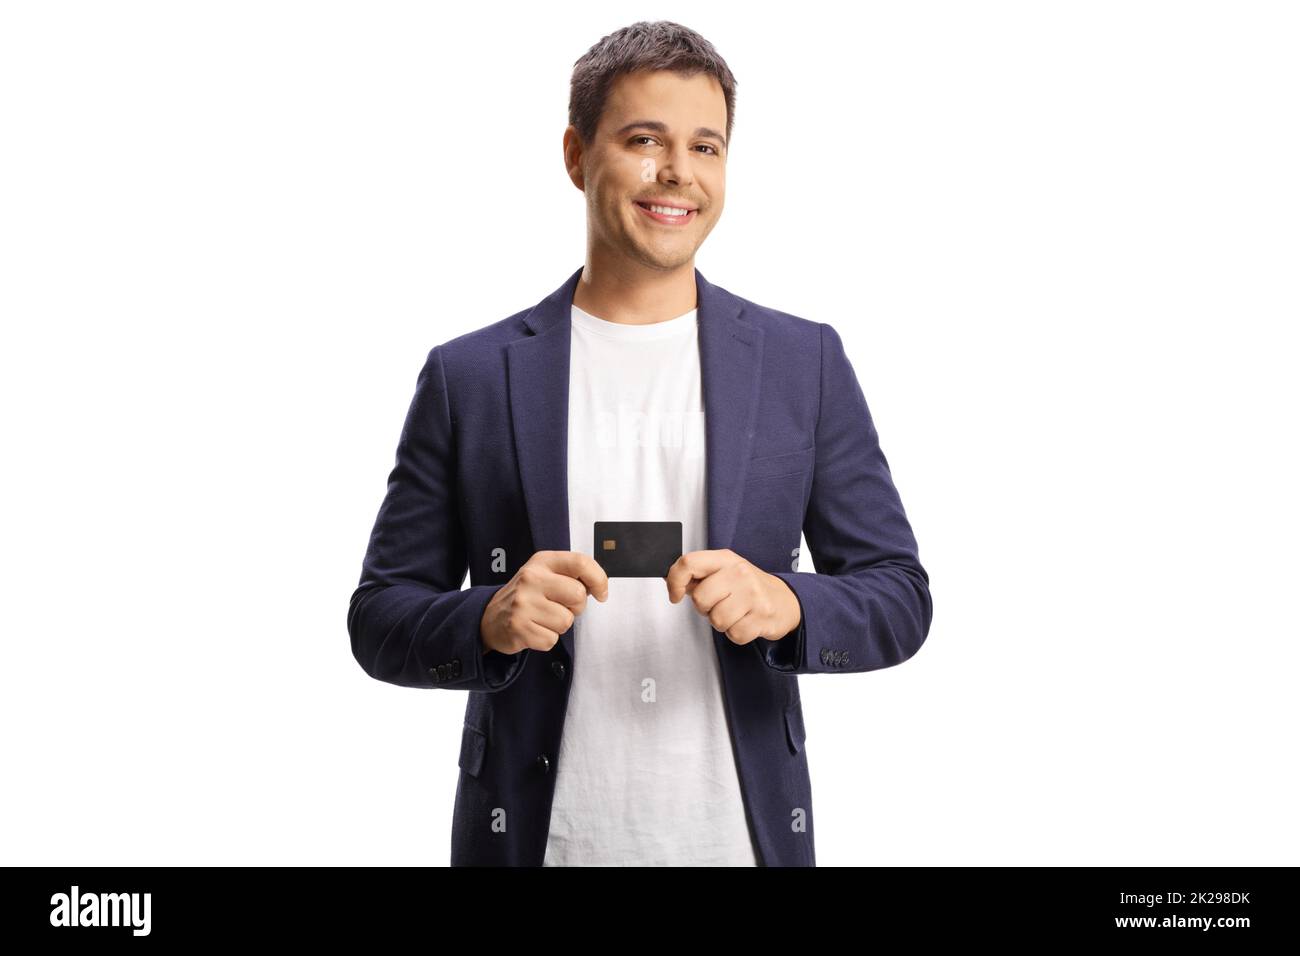 Smiling young man holding a credit card isolated on white background Stock Photo